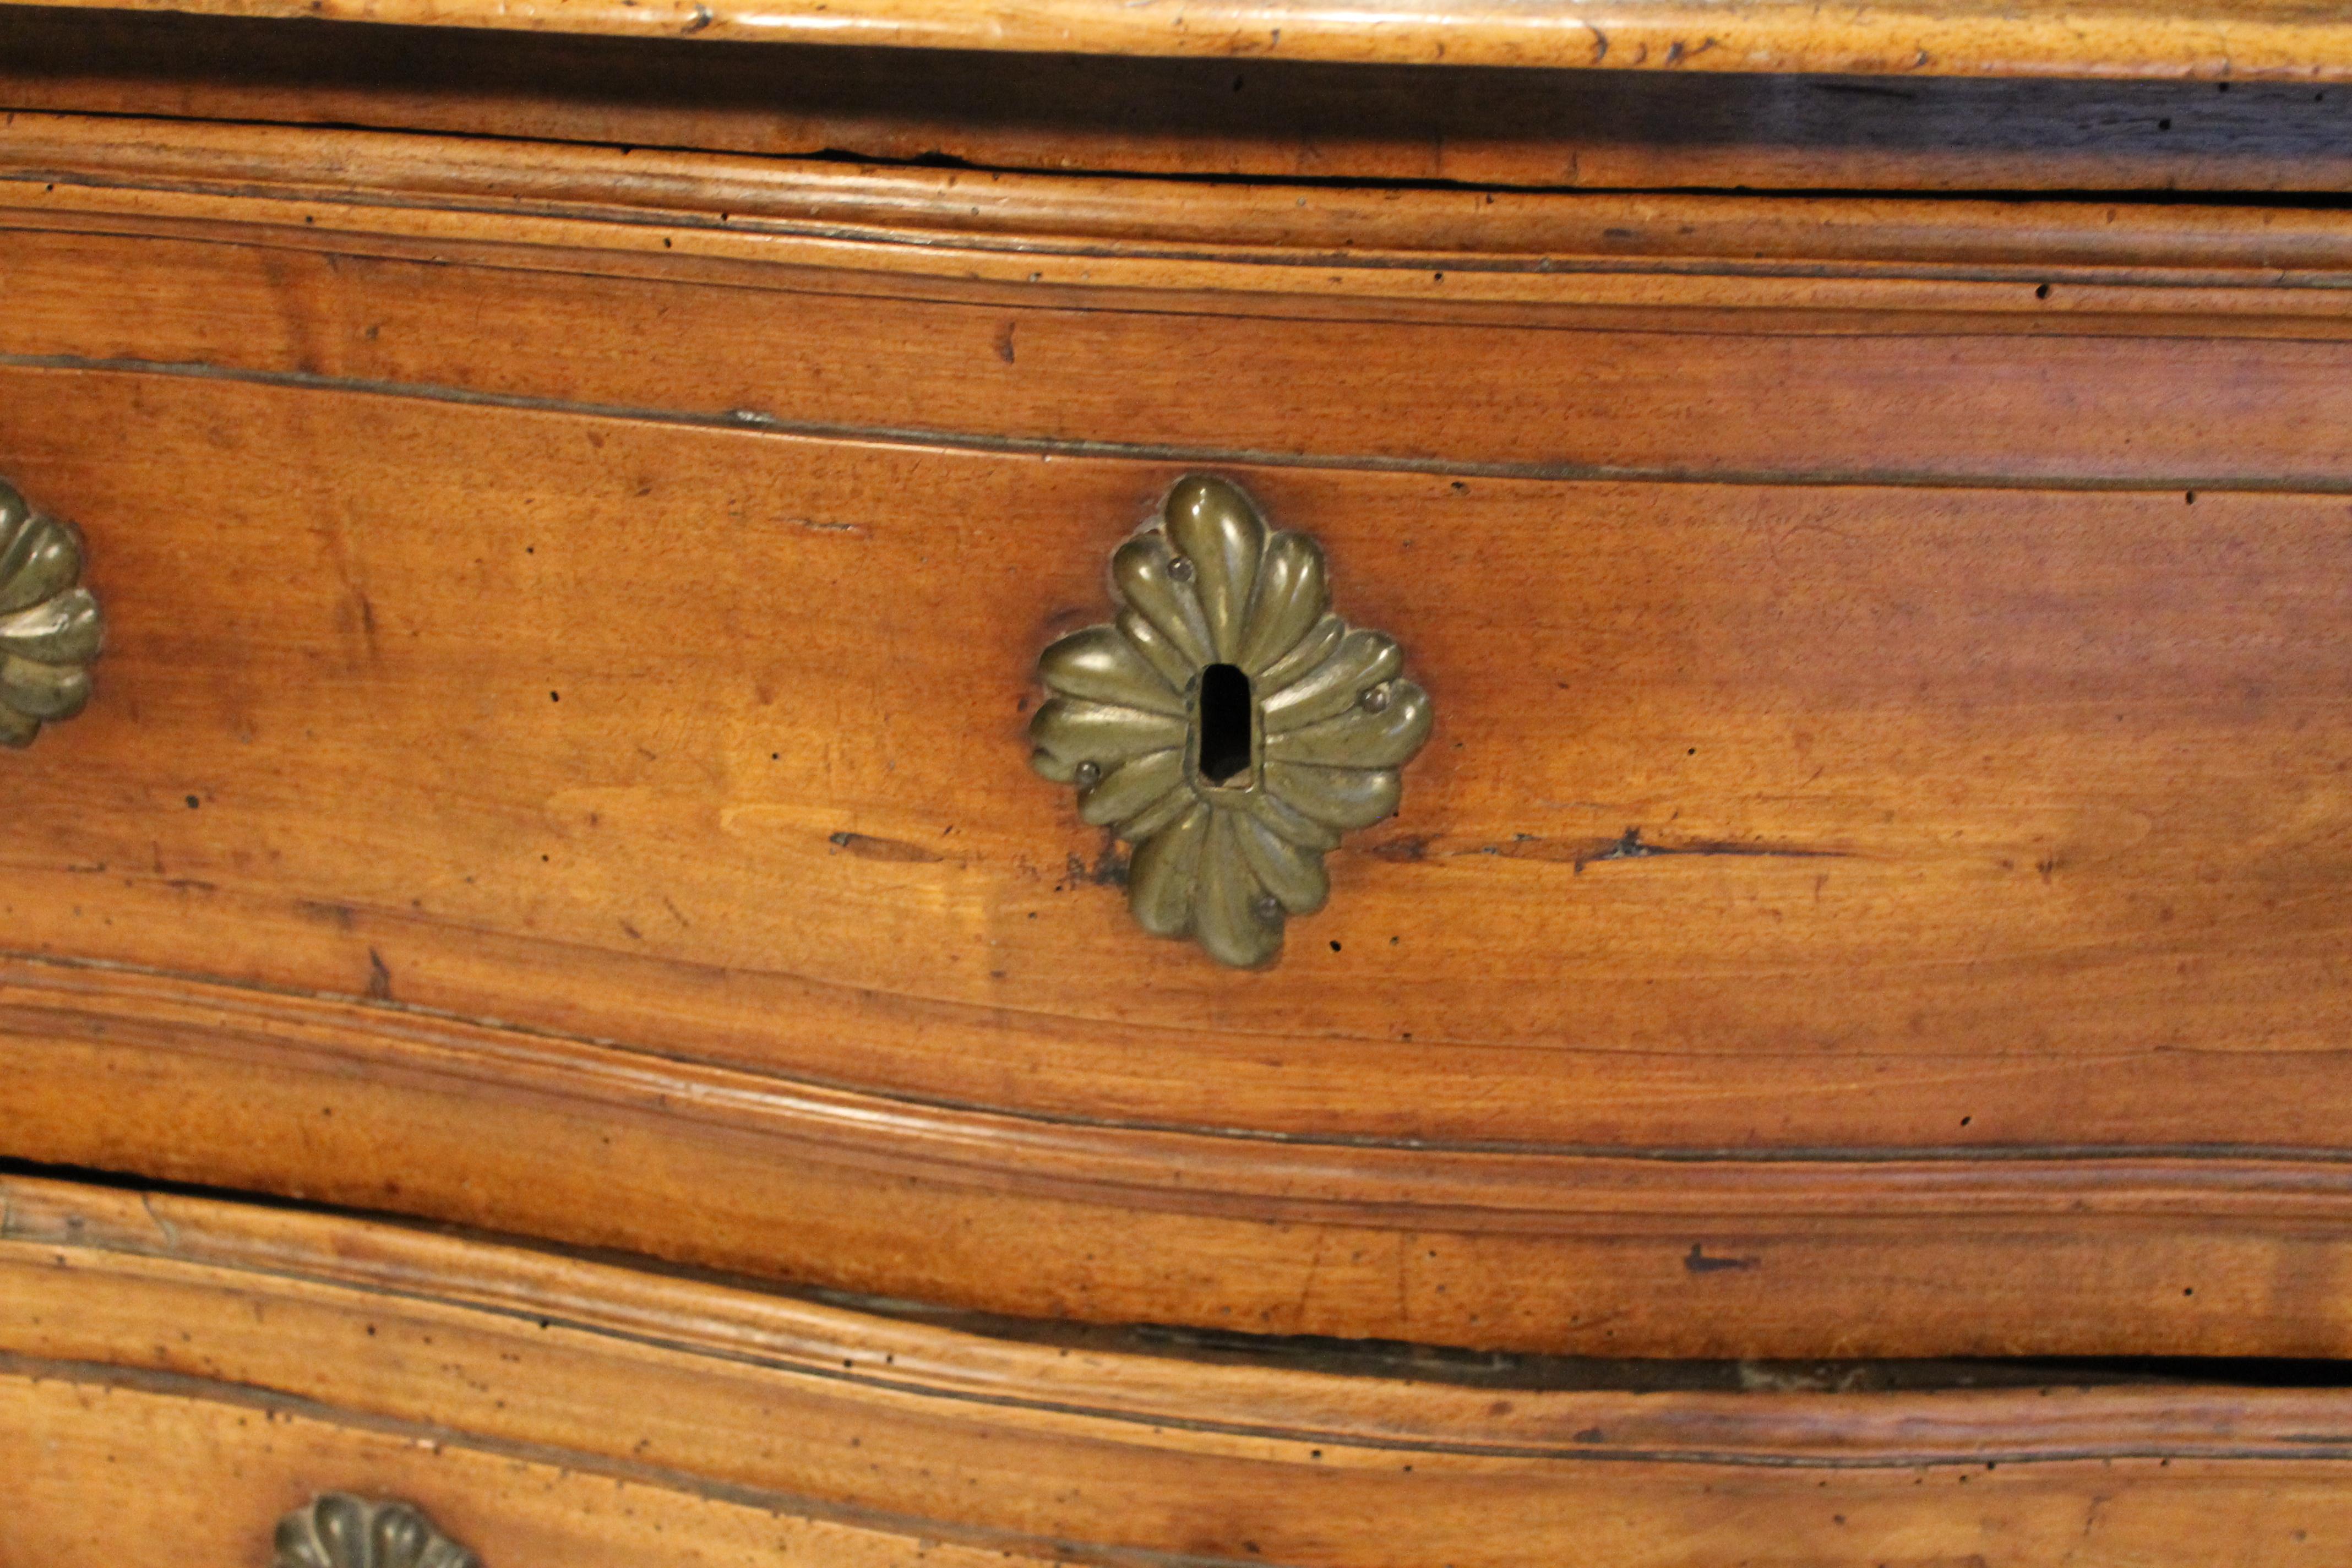 A stunning French Louis XV three drawer walnut commode in amazing condition. Each drawer has been Intricately carved with floral details and fitted with bronze hardware. The details on this amazing antique continue with cabriole feet and a